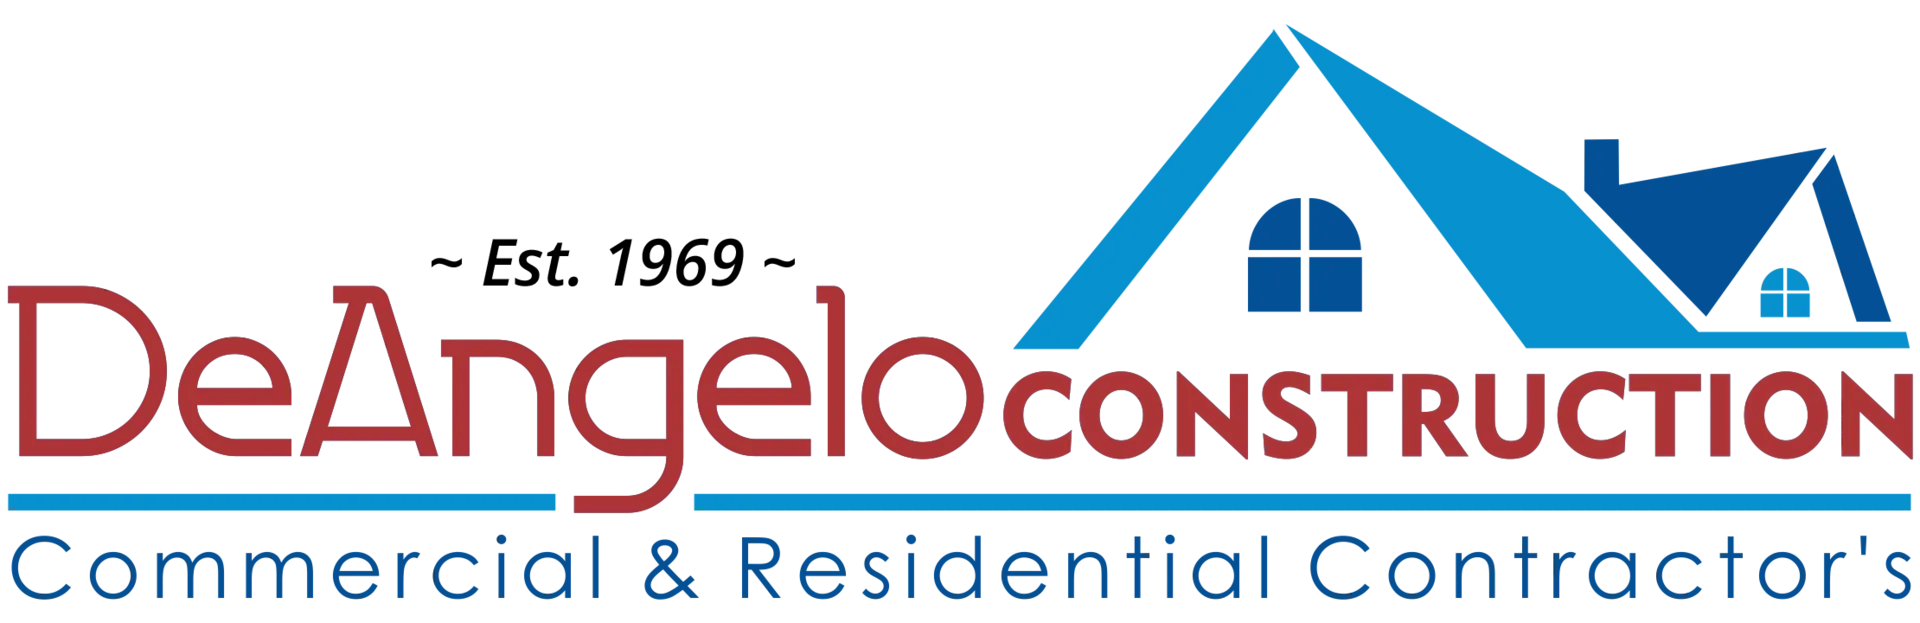 DeAngelo Construction - Commercial and Residential Construction